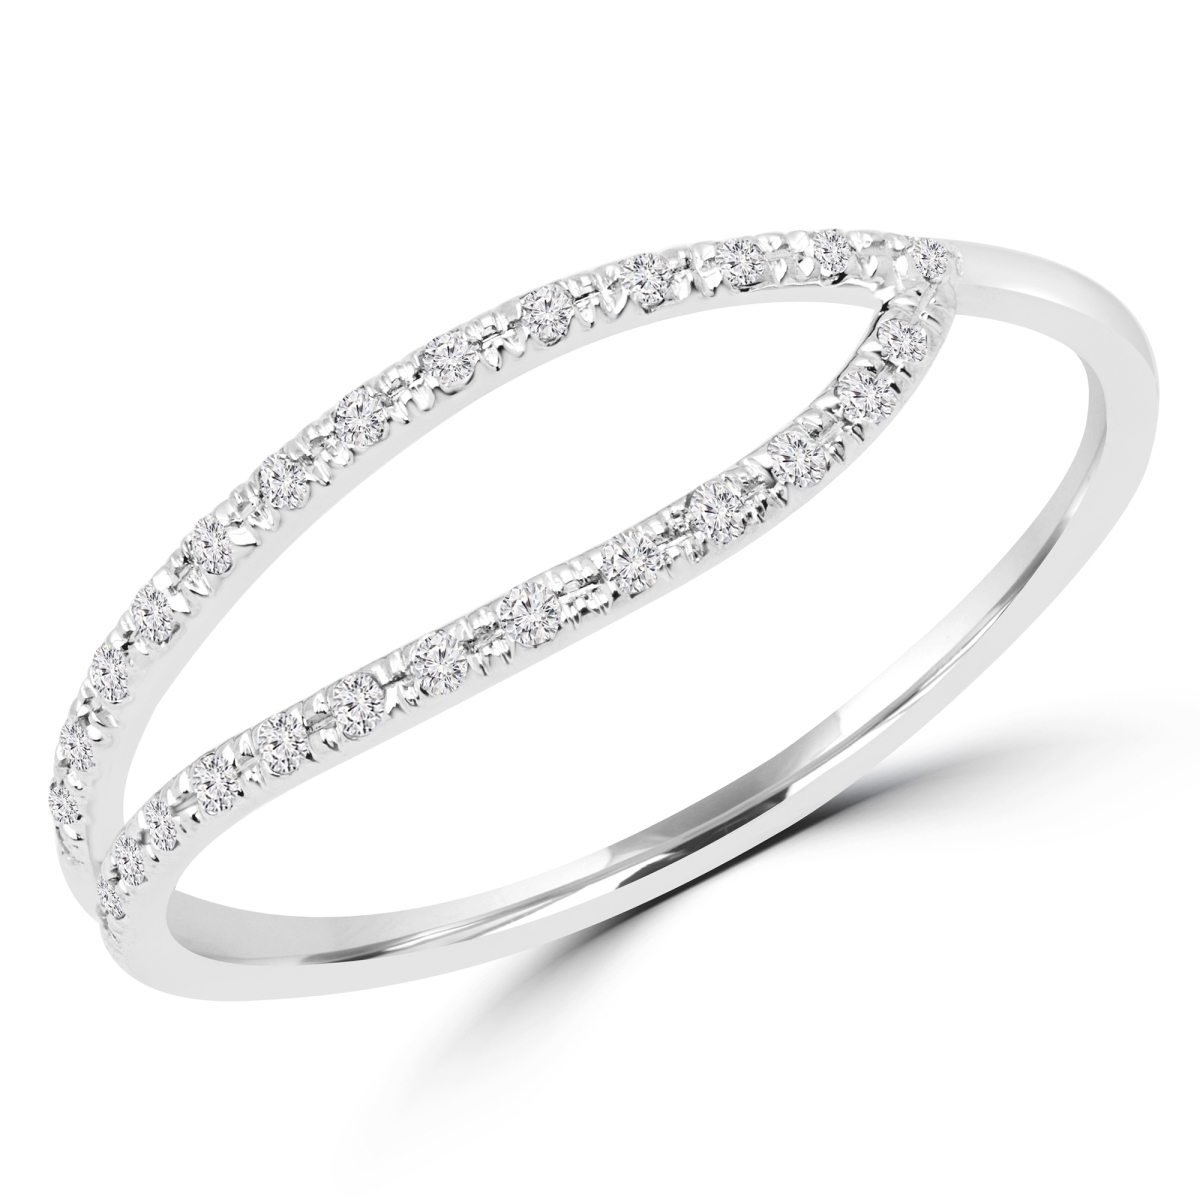 Picture of Majesty Diamonds MDR170056-3 0.1 CTW Round Diamond Cocktail Ring in 14K White Gold - Size 3